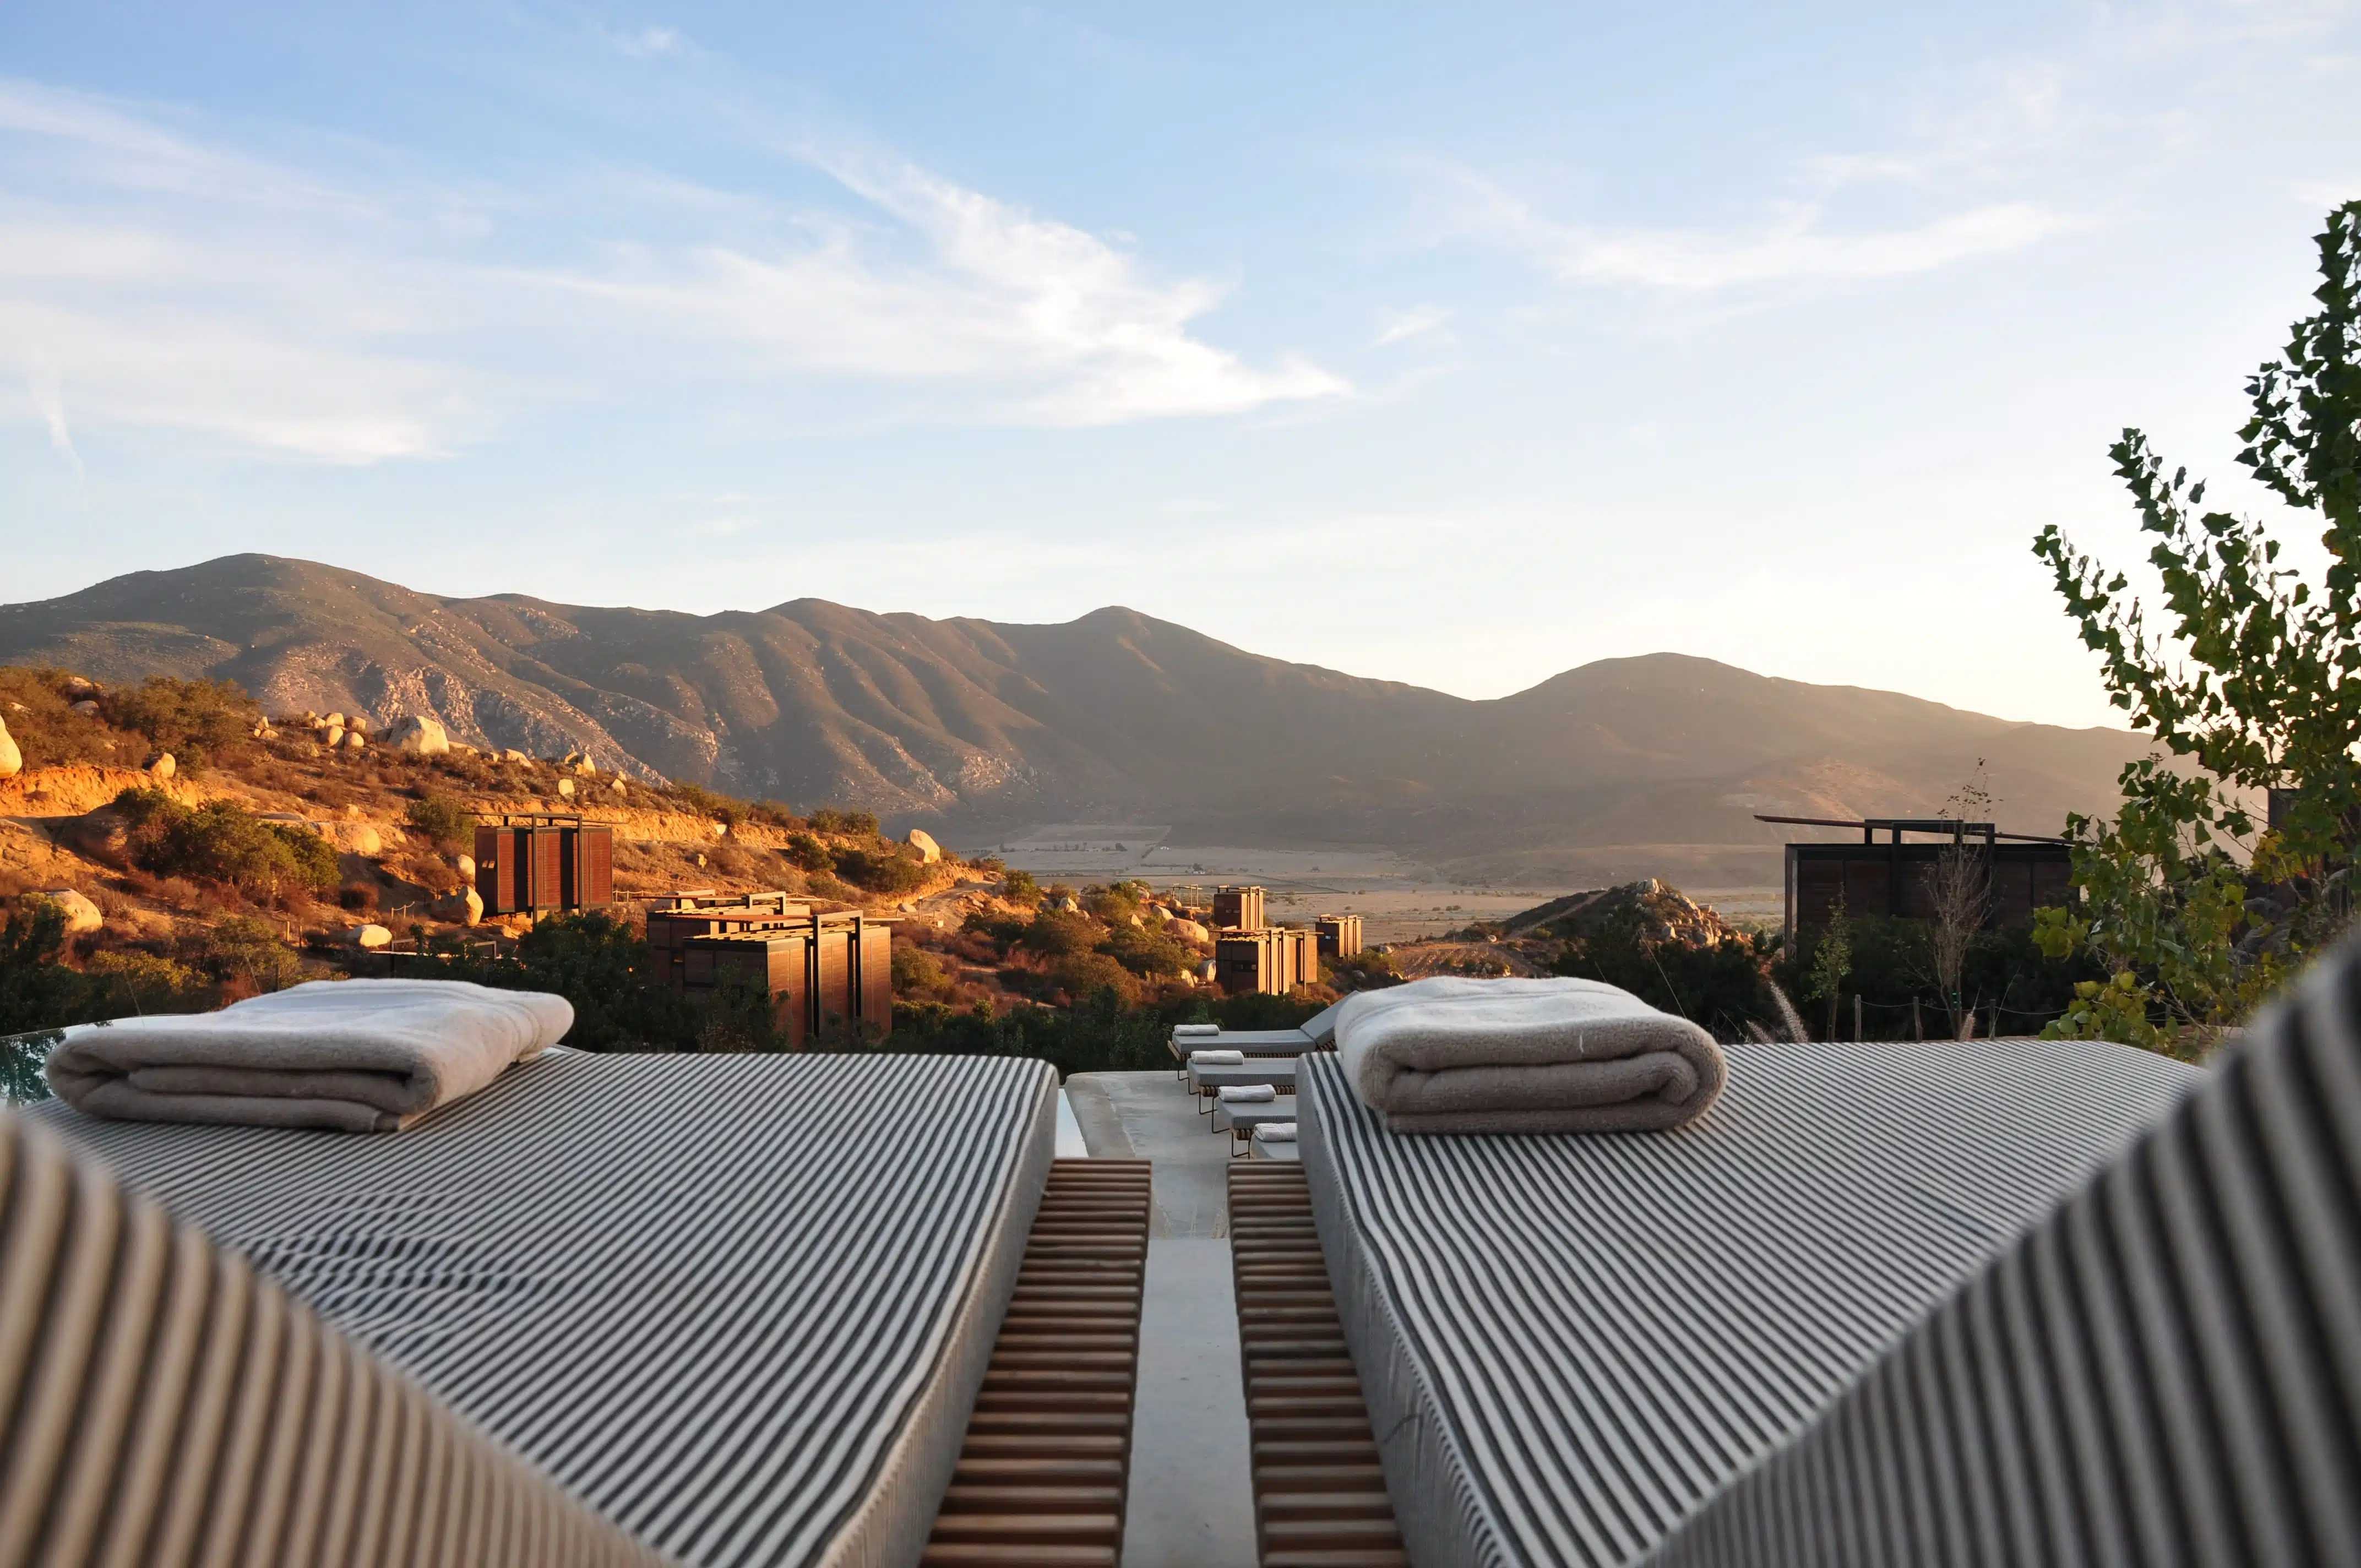 Hotel with beds overlooking mountains